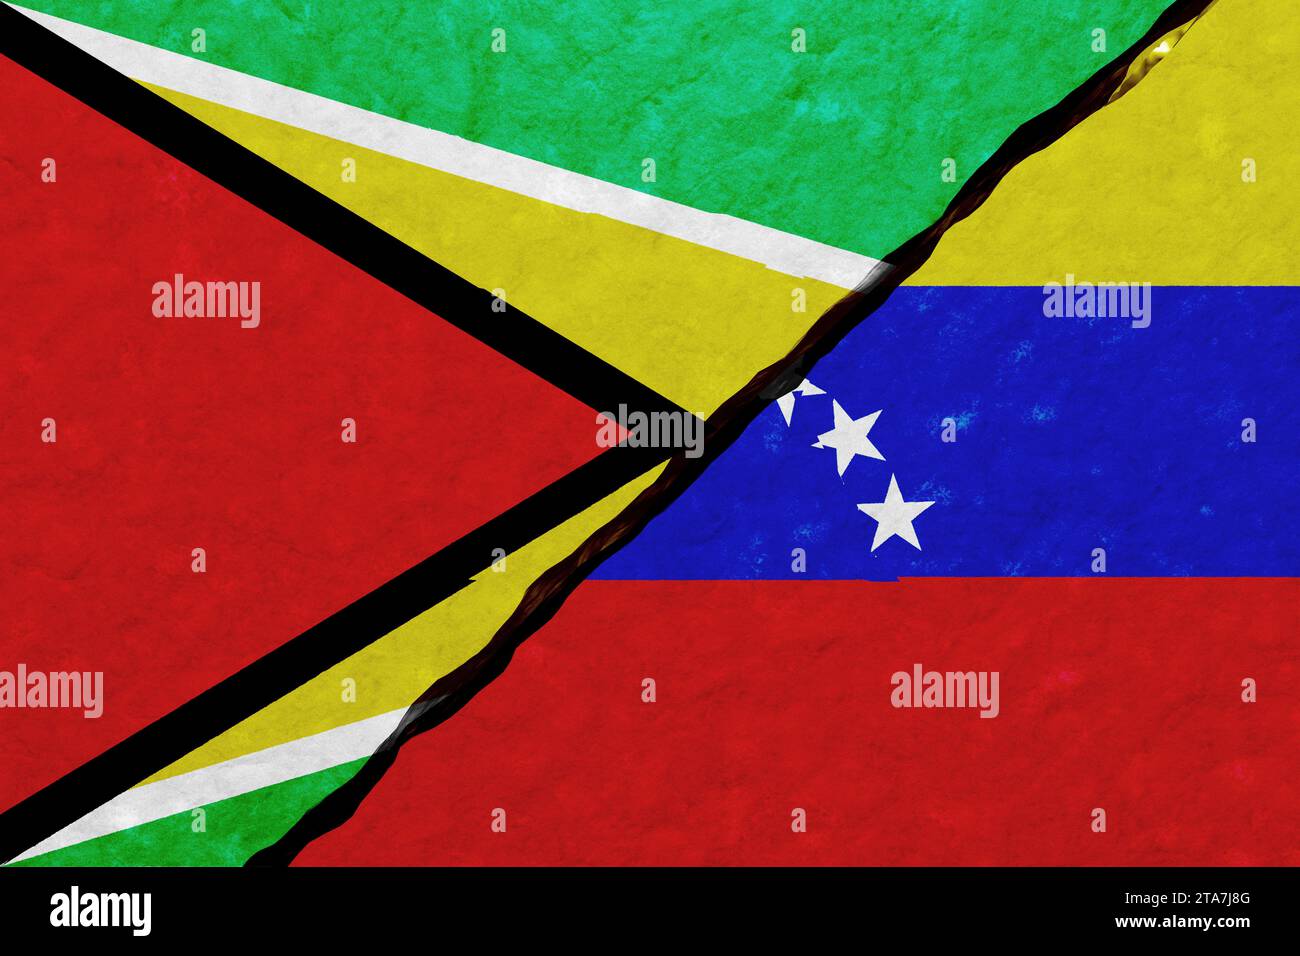 SPECTACULAR CRACKED WALL OF GUYANA AND VENEZUELA  BACKGROUND CONFLICT RELATIONSHIPS Stock Photo